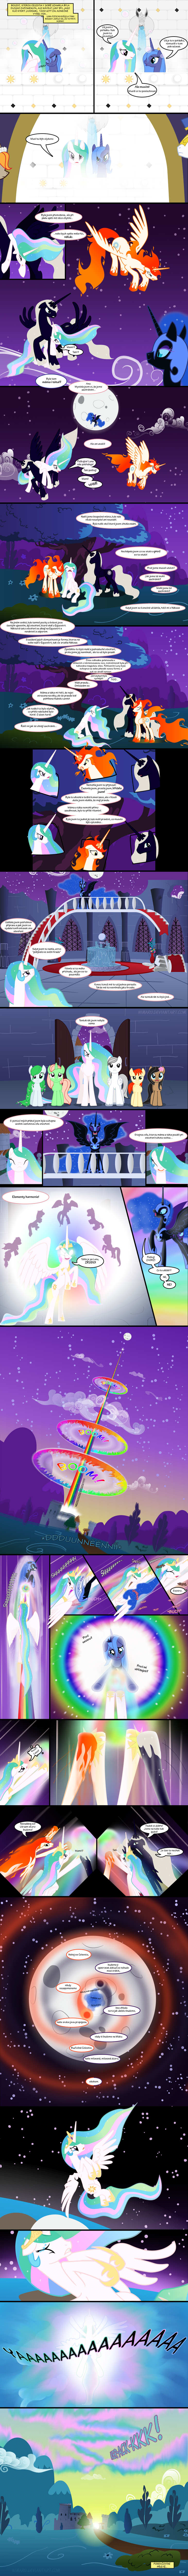 [Obrázek: the_real_story___p3__the_moon_by_nimaru-d4a2yar_csy.png]